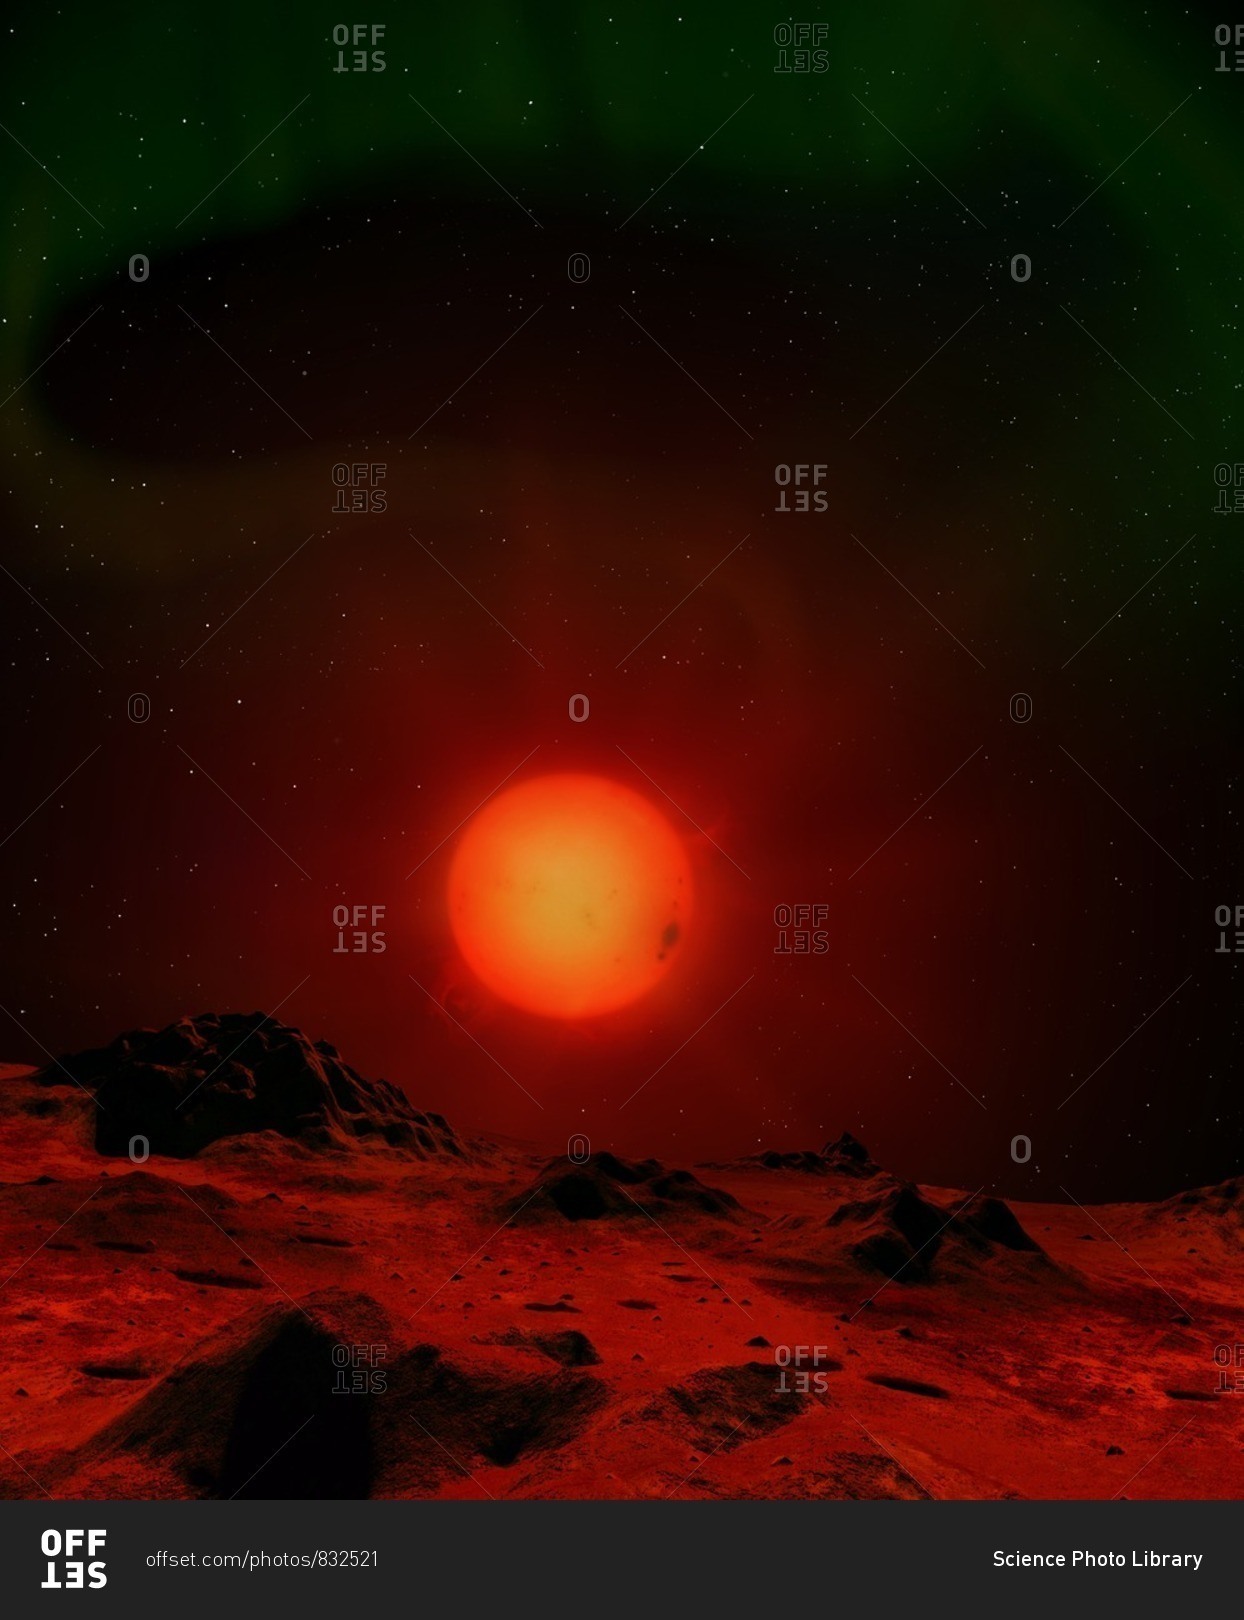 Illustration of a red dwarf star seen from the surface of an
orbiting world. Red dwarfs are the most common stars in the
universe. Like the Sun they are main-sequence stars, burning
hydrogen, but substantially cooler, dimmer; redder and smaller.
Proxima C